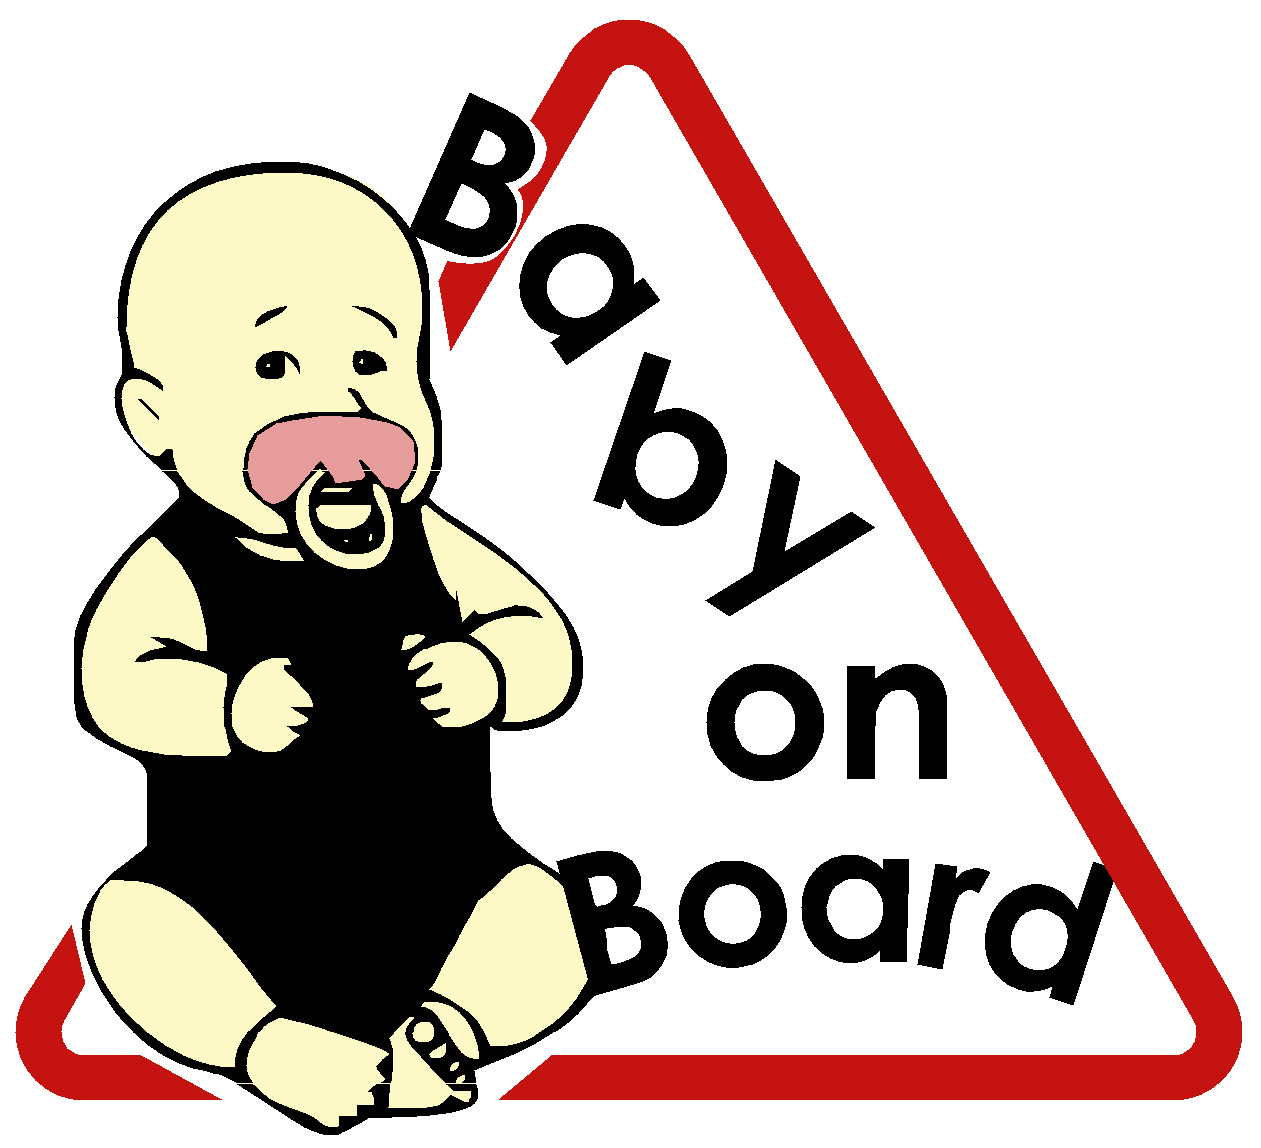 CAUTION BABY ON BOARD TRIANGLE